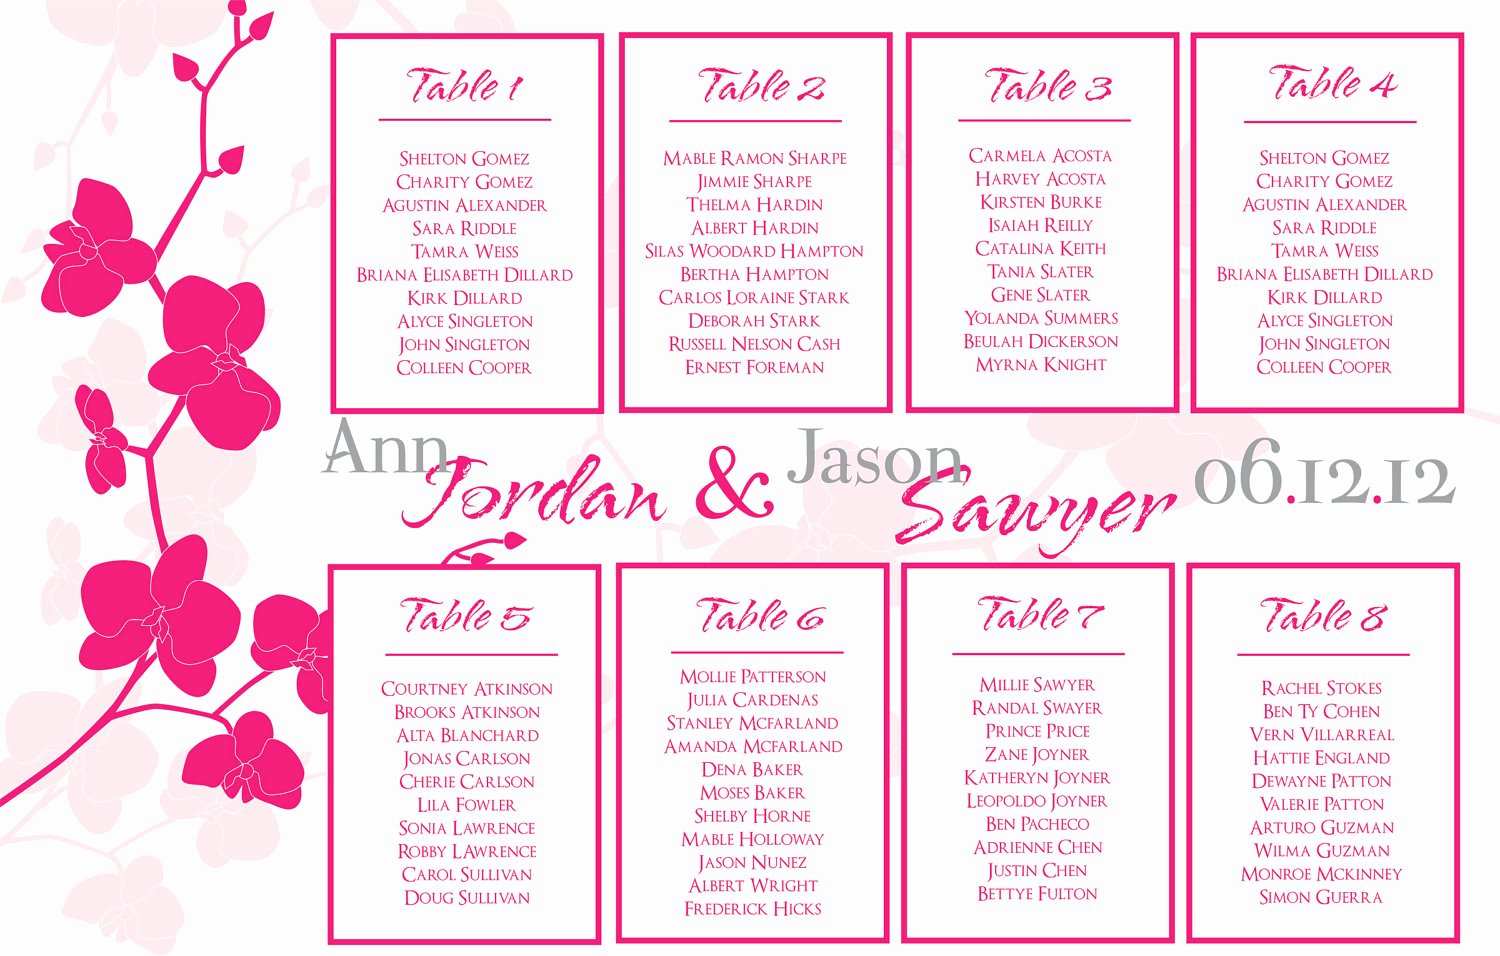 Seating Chart Template Excel Beautiful Search Results for “free Seating Chart Template Wedding